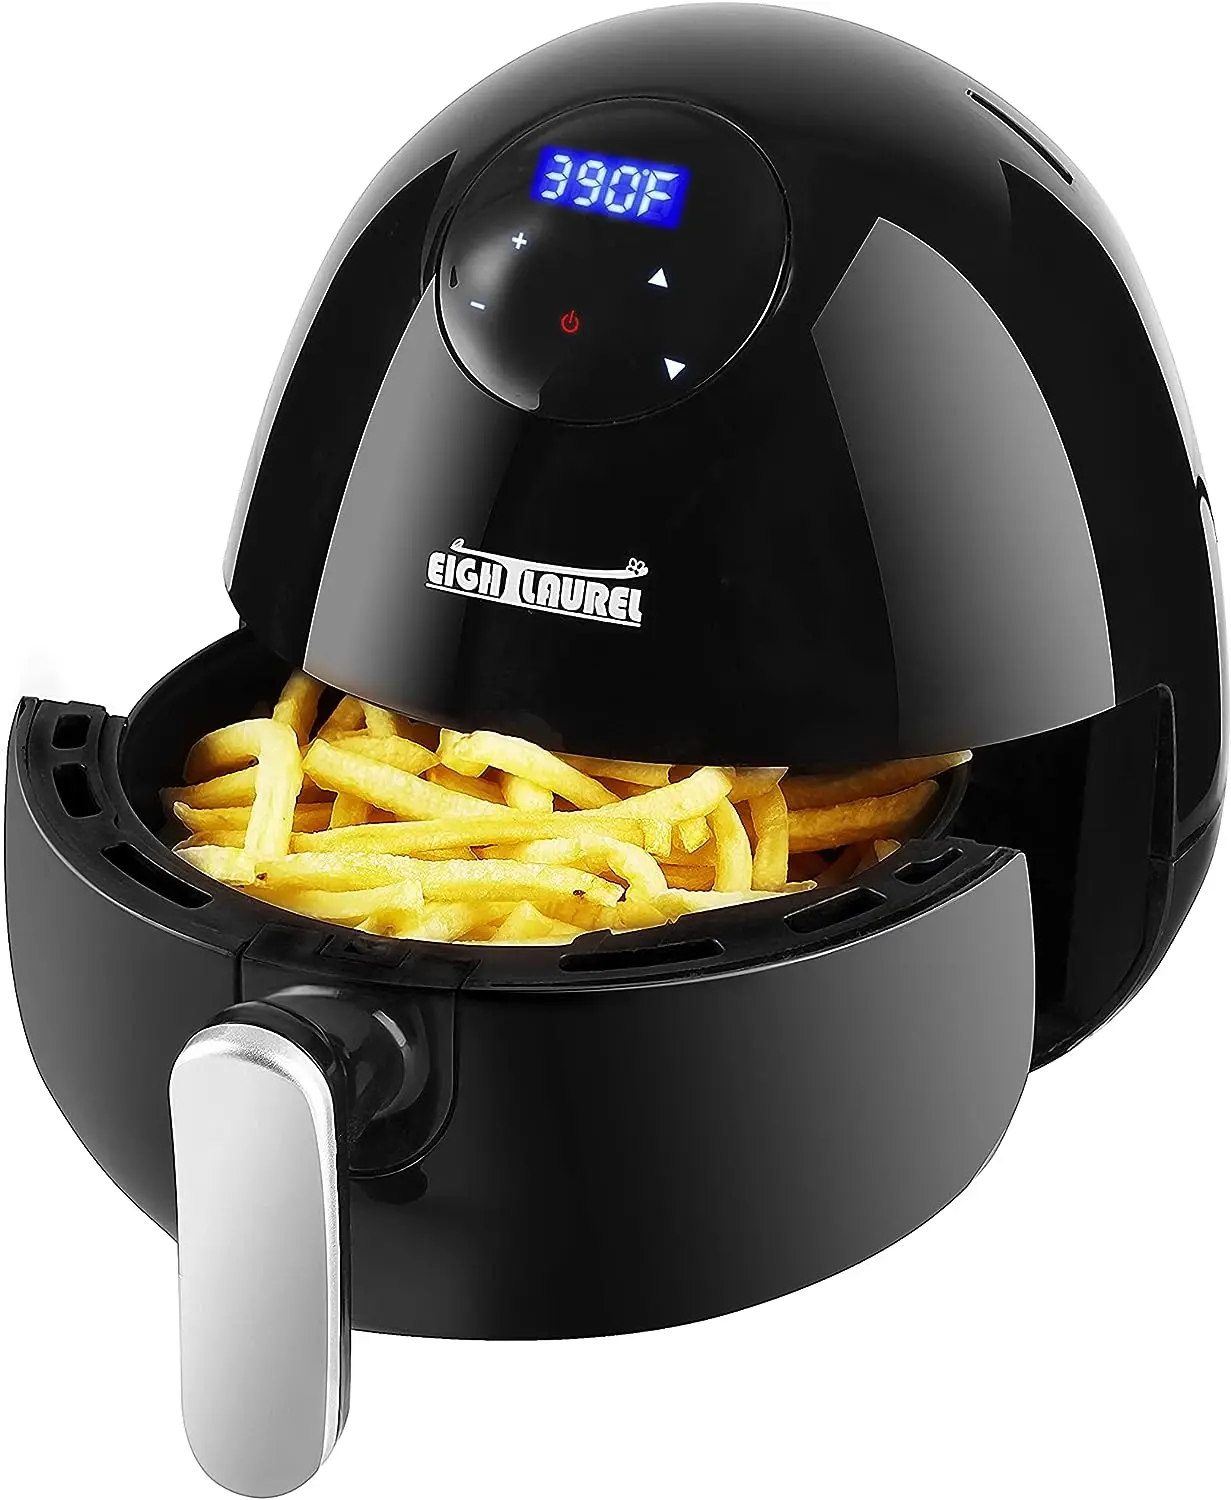 

Air Fryer, 700-Watt Airfryer Compact Oilless Small Oven with Basket, 1.64 Quart Capacity 90°F- 390°F Temperature Controls and